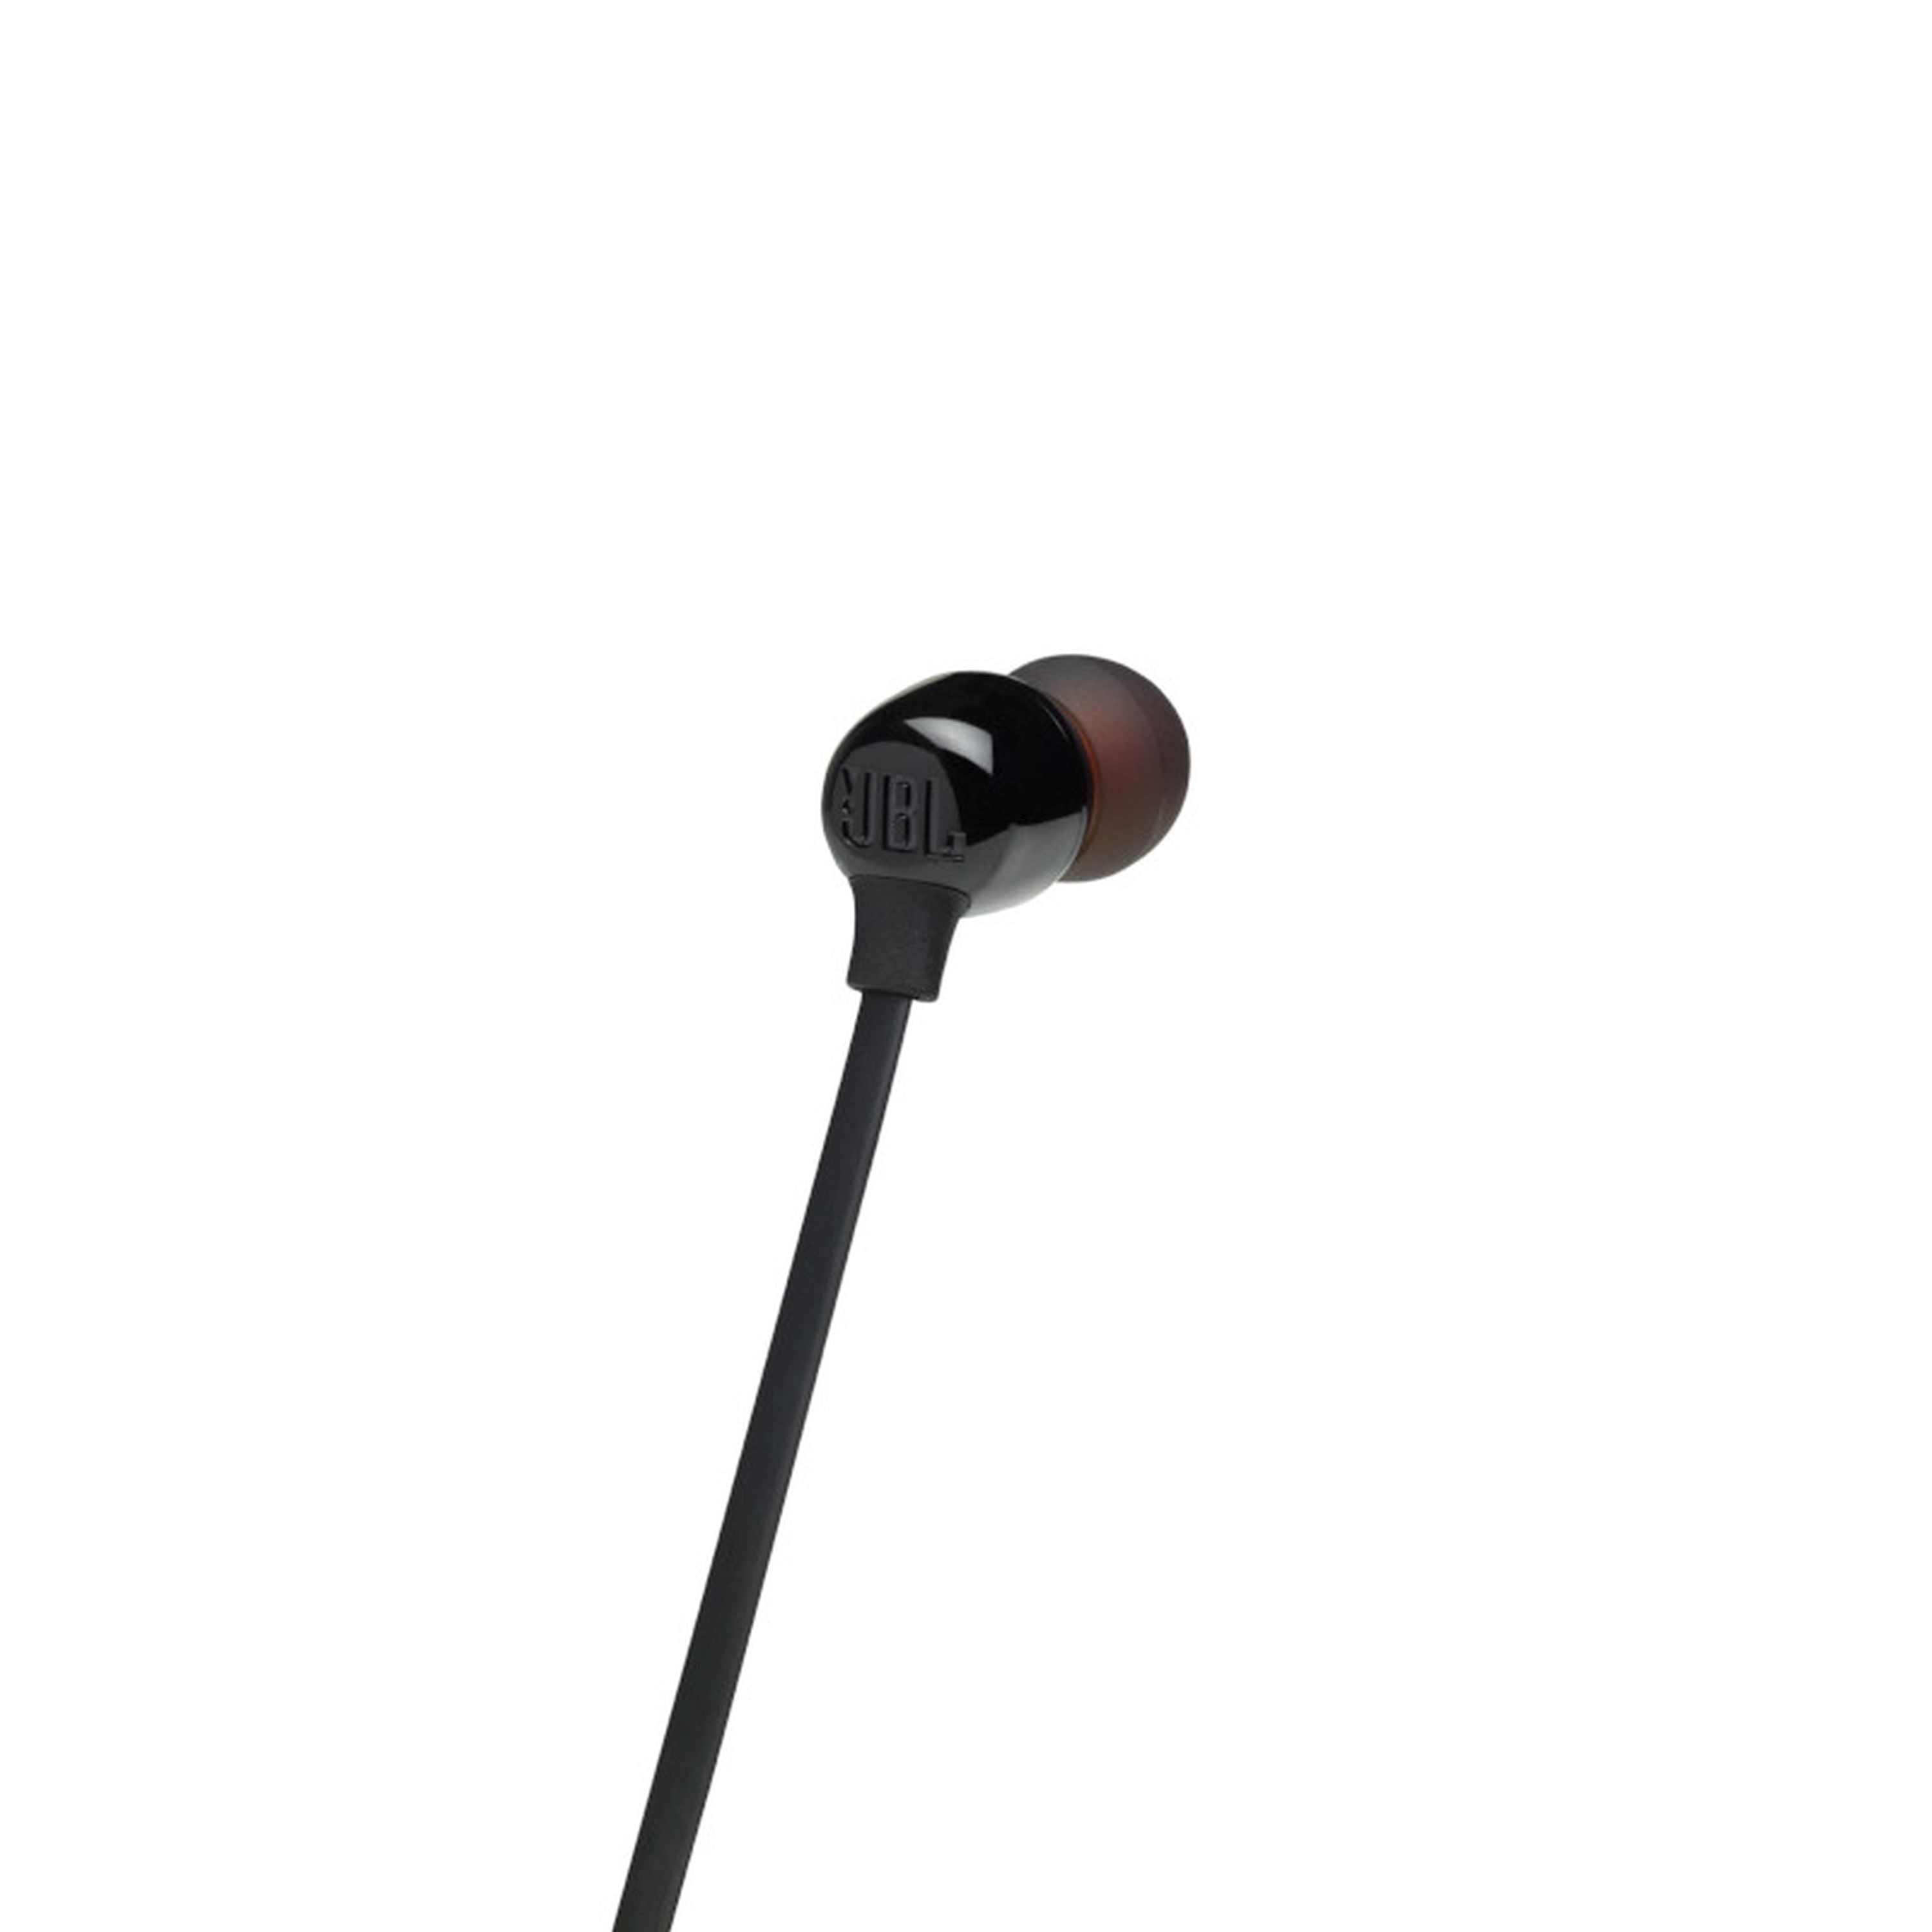 Tune & the - Bass | Pure 16-Hour with Life Headphones JBL Battery at in Bluetooth Sound JBL Wireless Earbuds 125BT department Headphones Black In-Ear